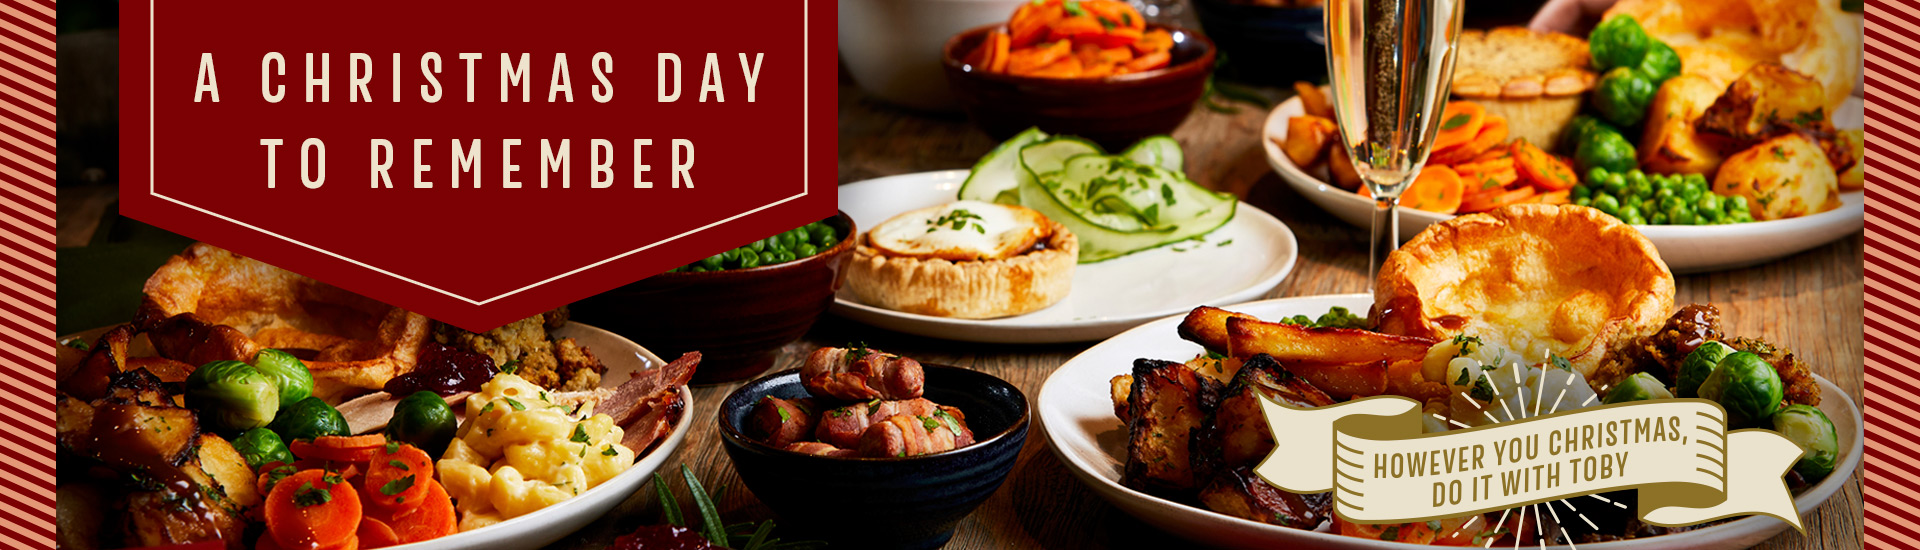 Christmas Day menu at White Hart Toby Carvery